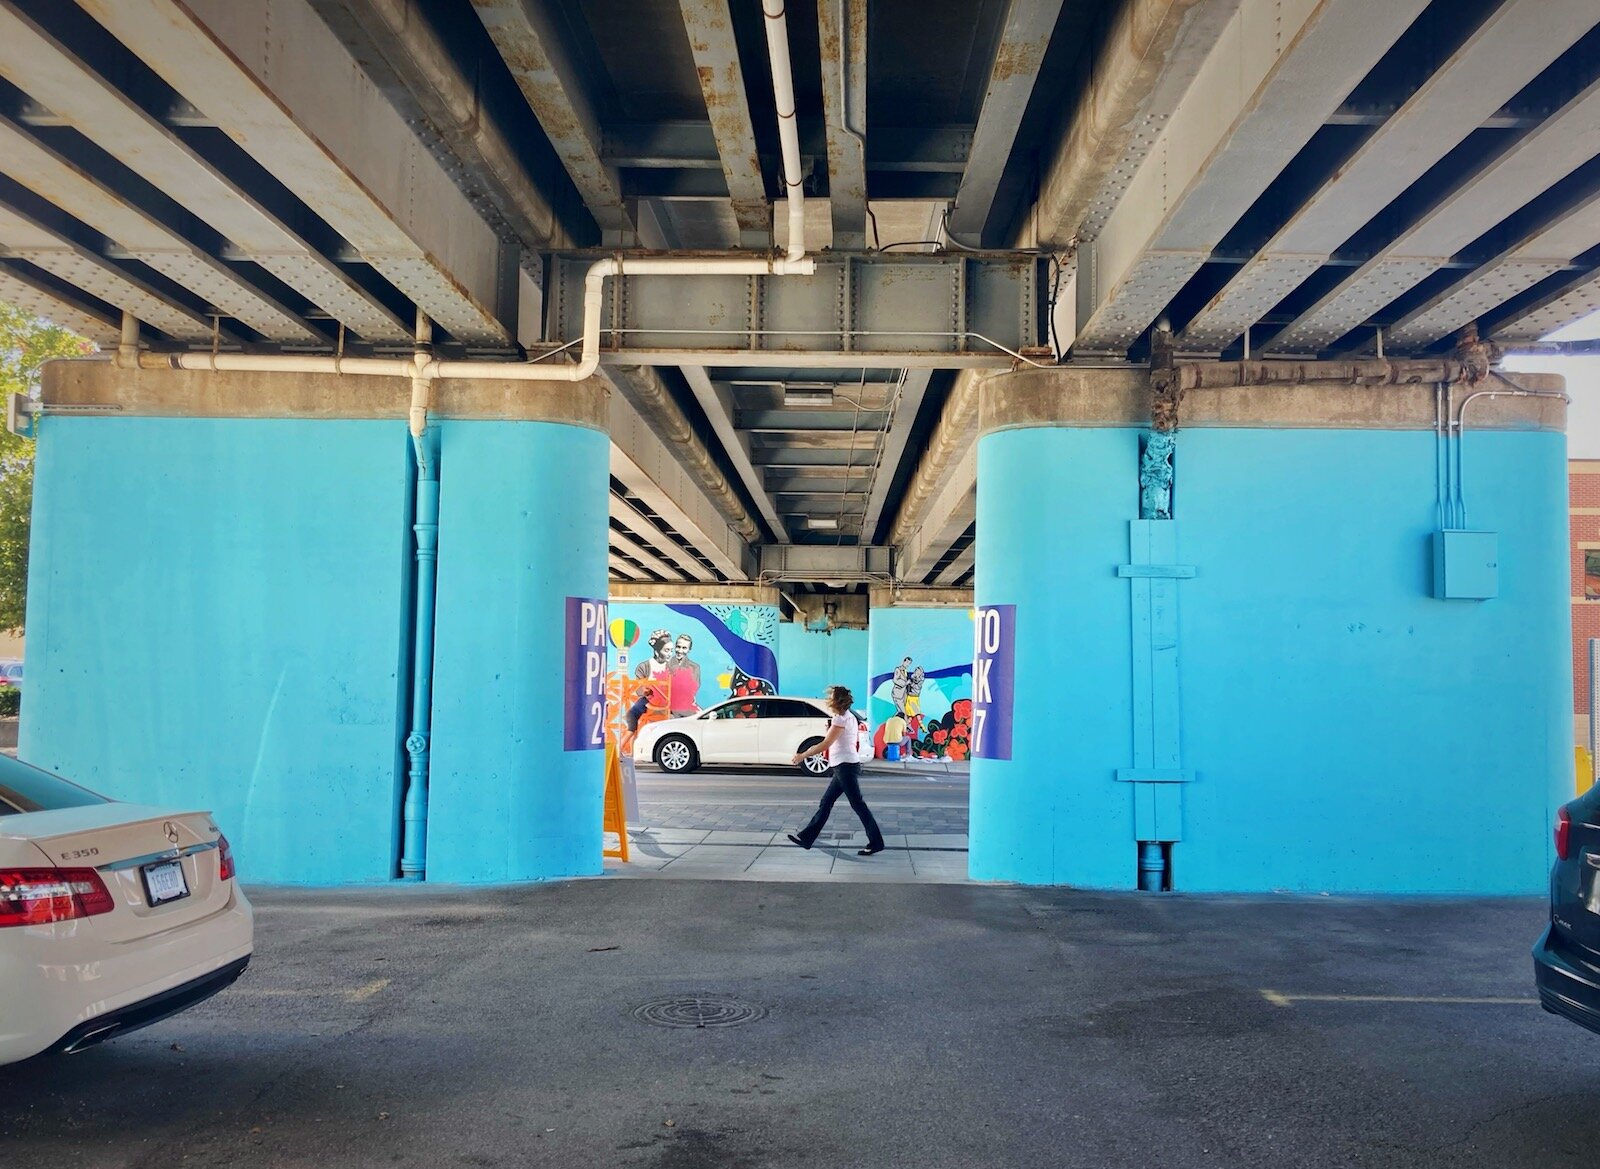 There's parking under the railroad overpass only steps away from The Landing near Harrison and Dock streets.